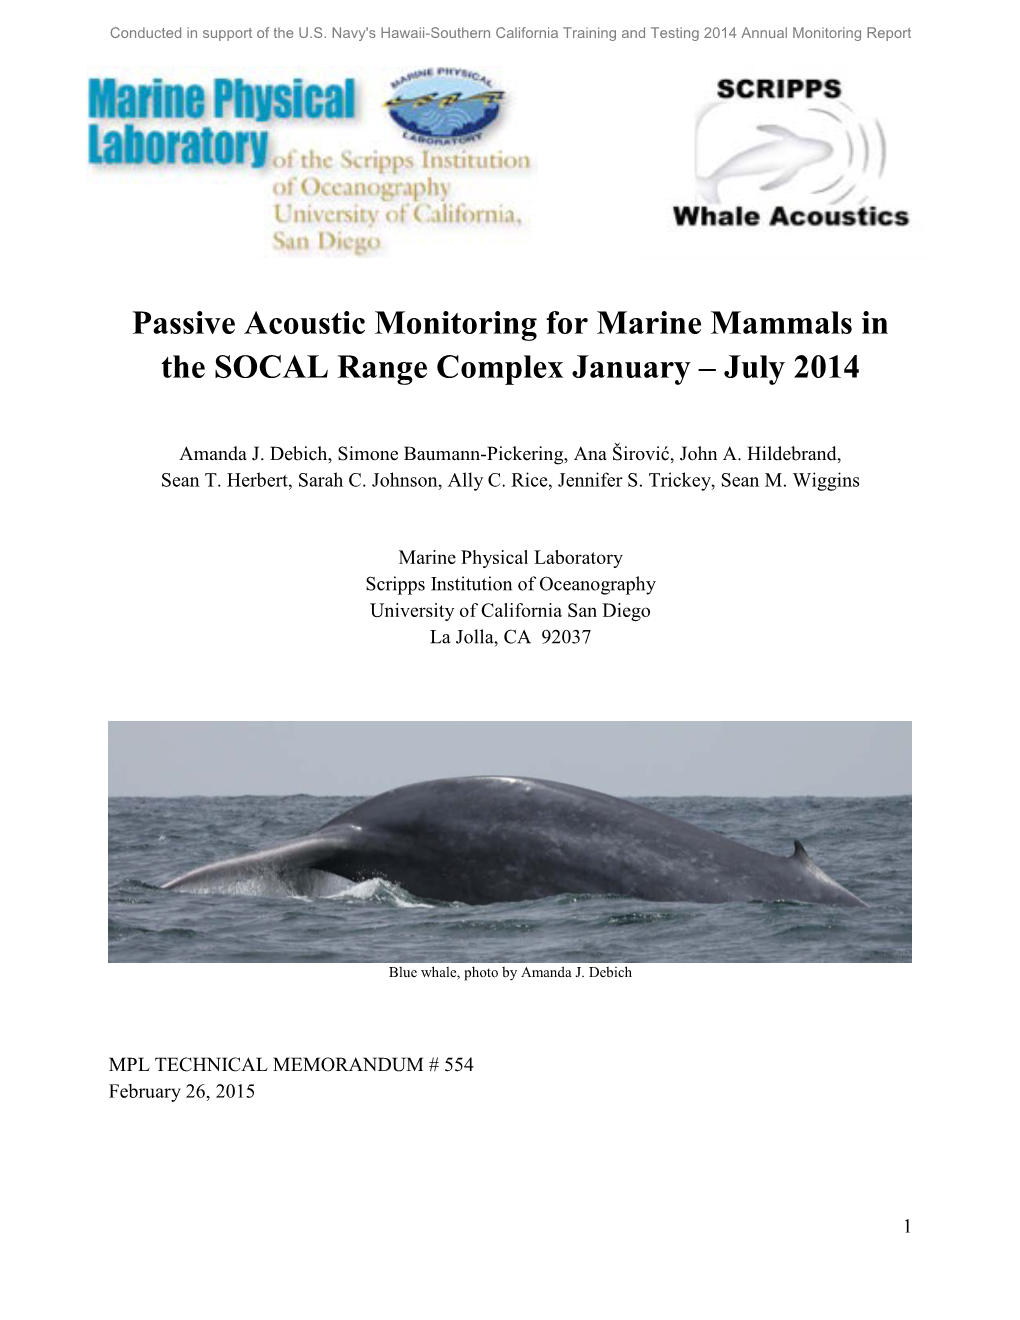 Passive Acoustic Monitoring for Marine Mammals in the SOCAL Range Complex January – July 2014